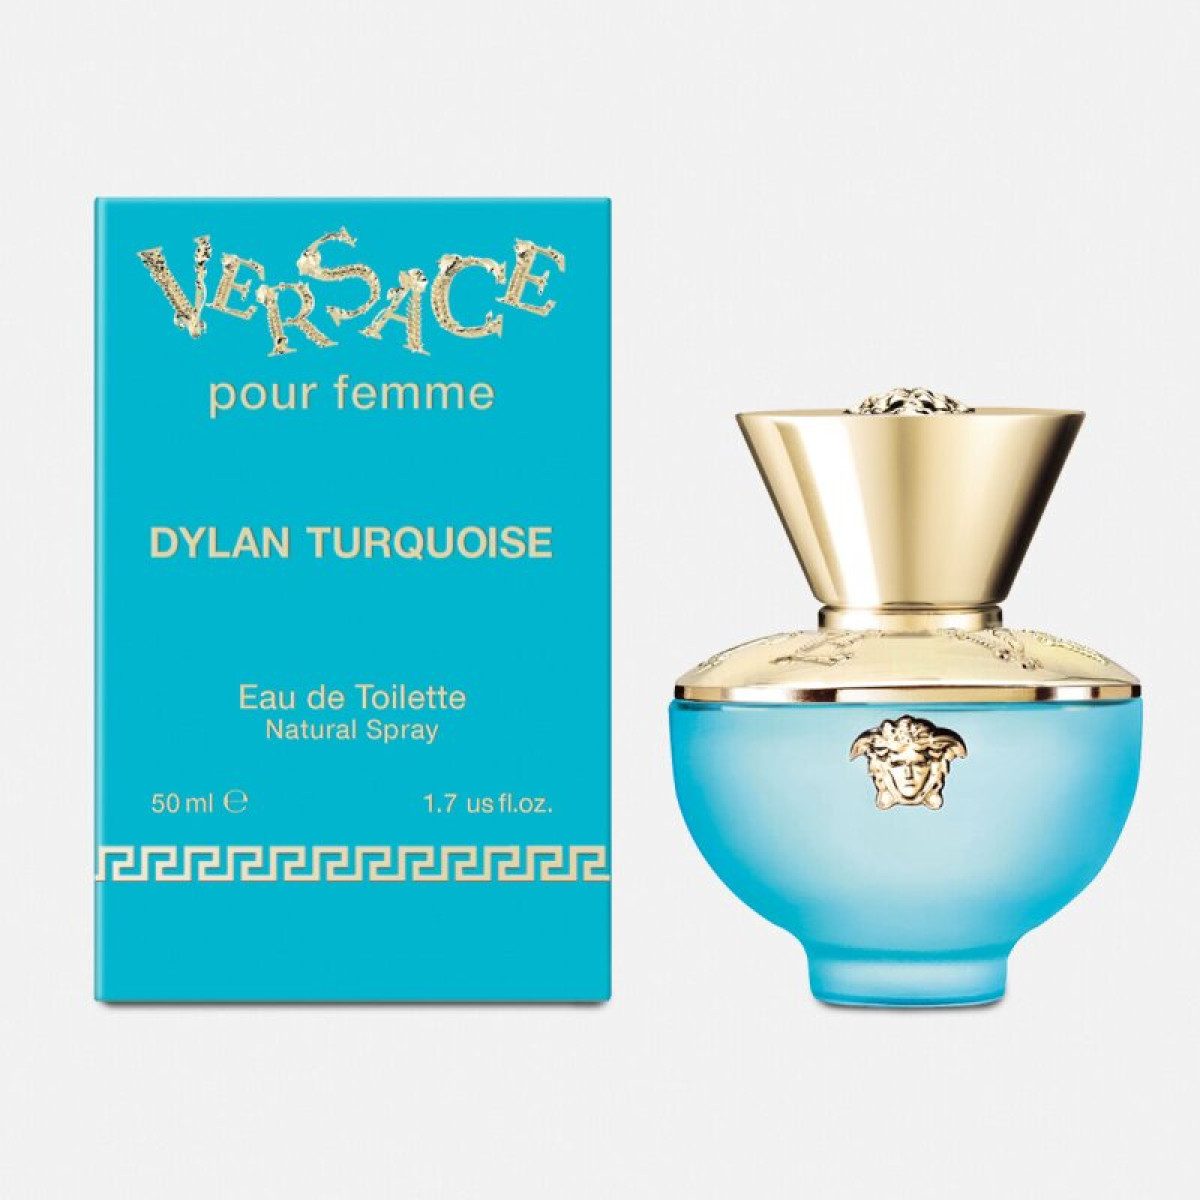 VERSACE DYLAN TURQUOISE EDT 50 ML